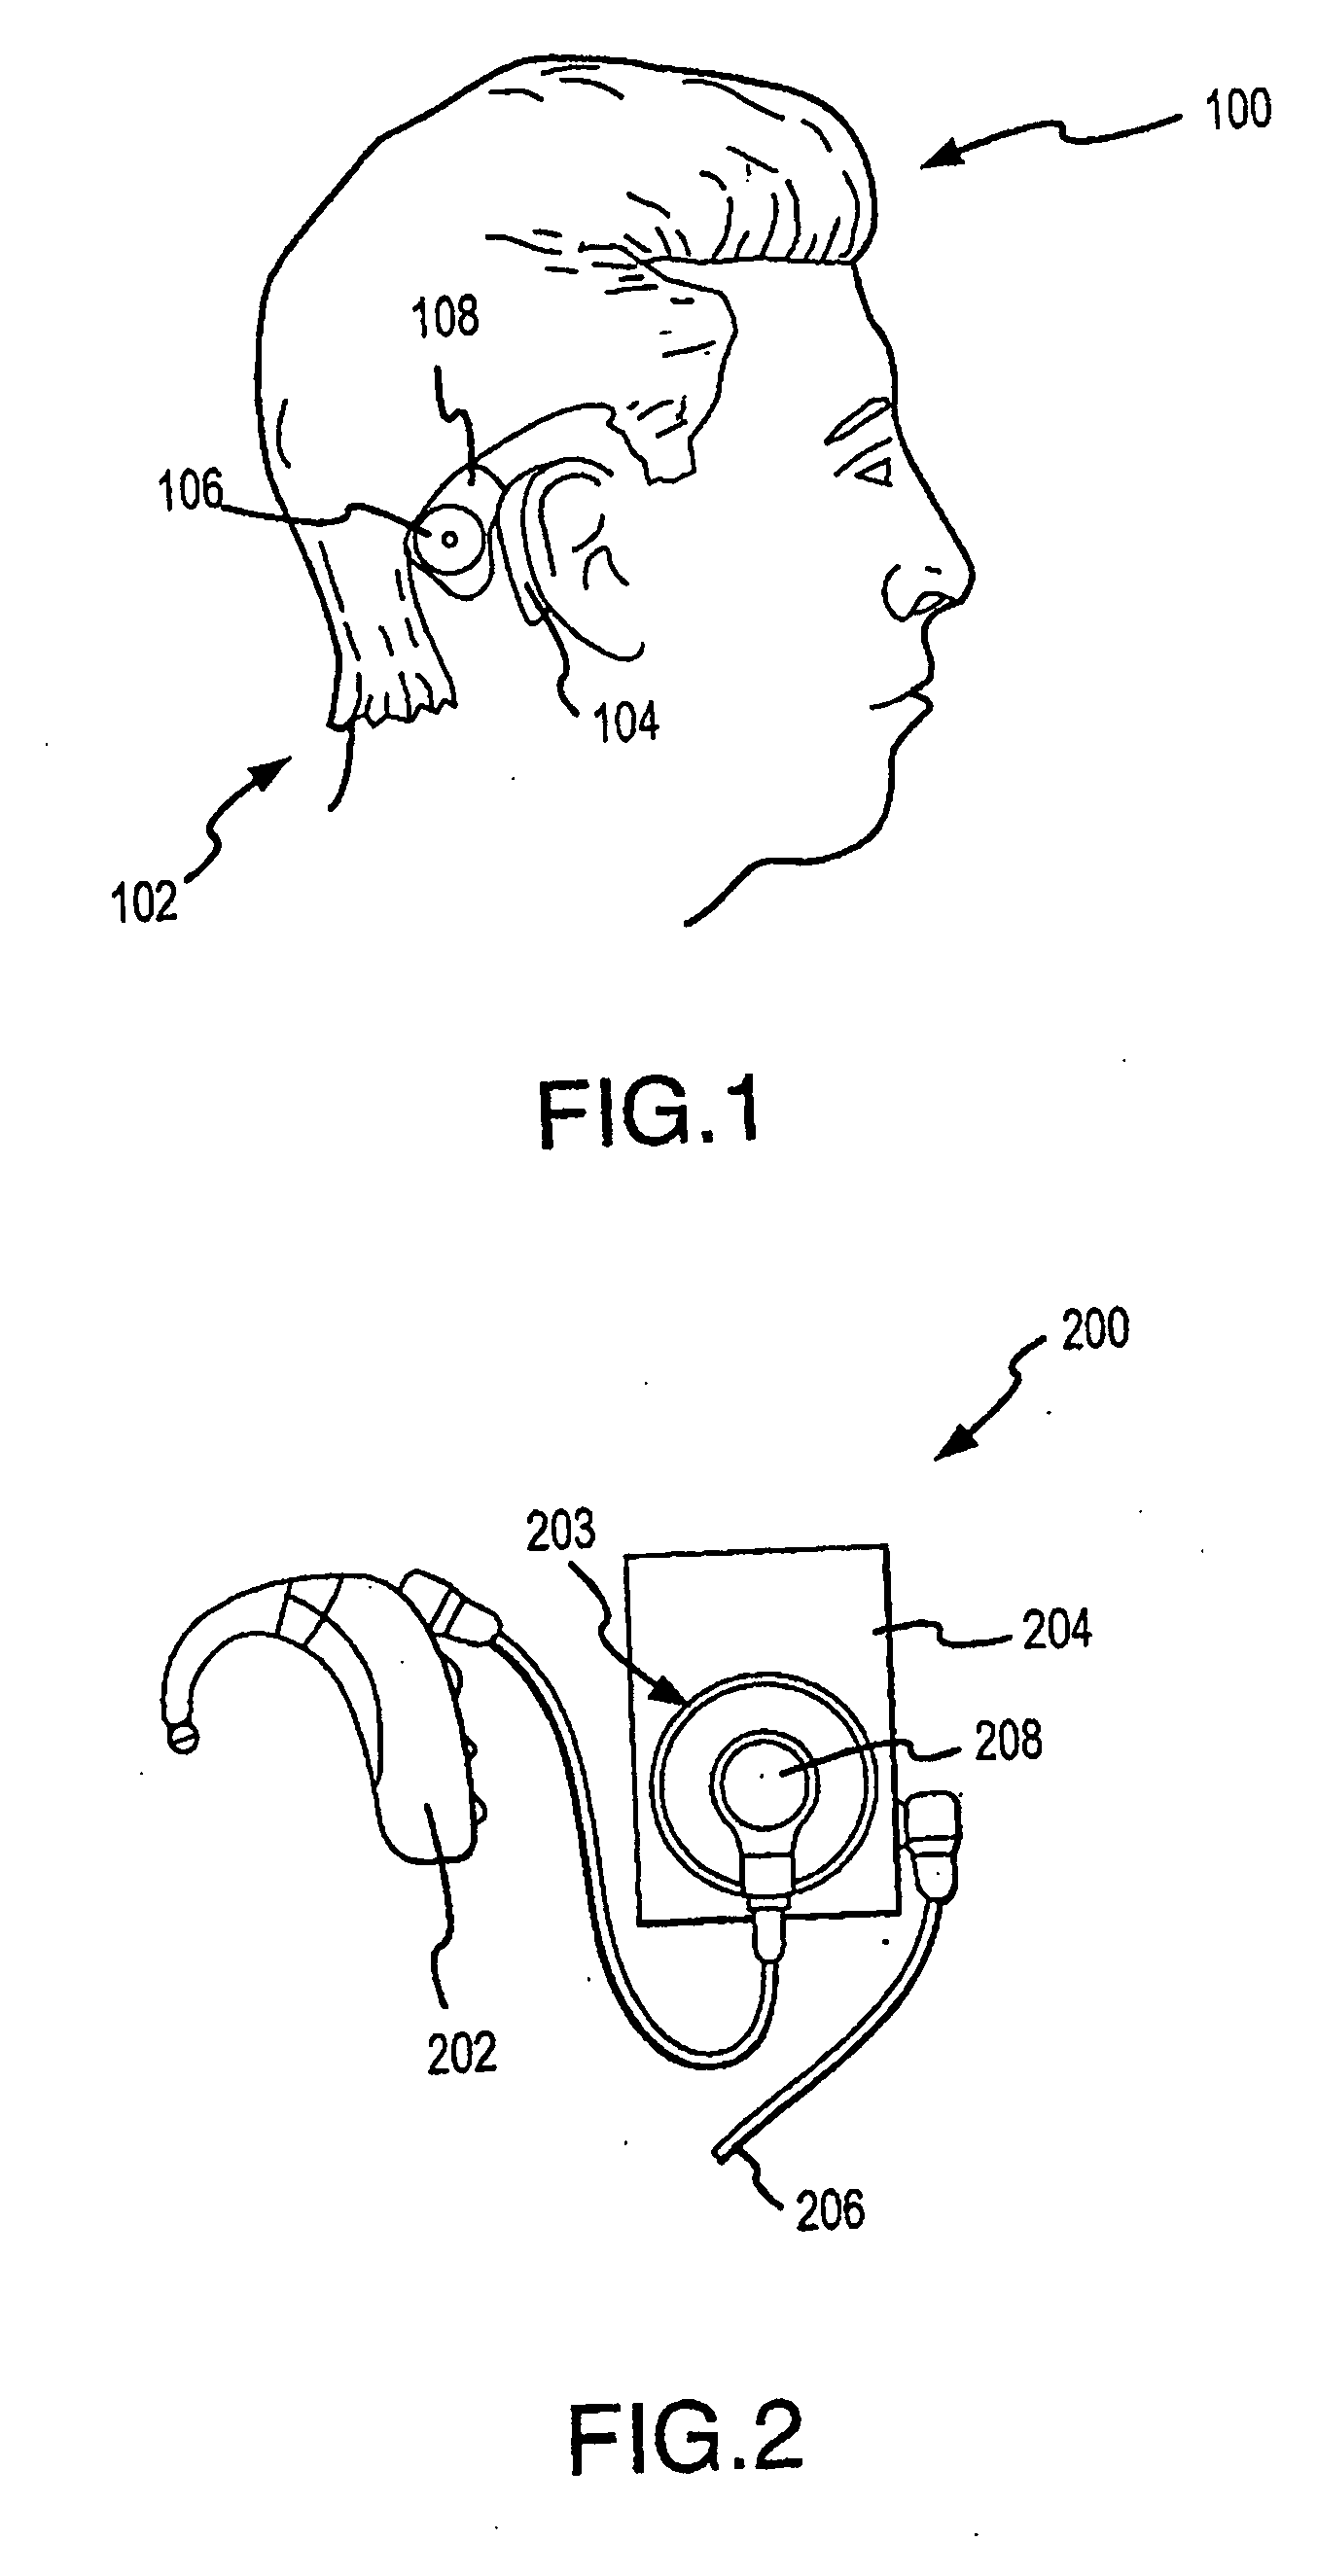 Method and apparatus for measuring the performance of an implantable middle ear hearing aid, and the response of a patient wearing such a hearing aid